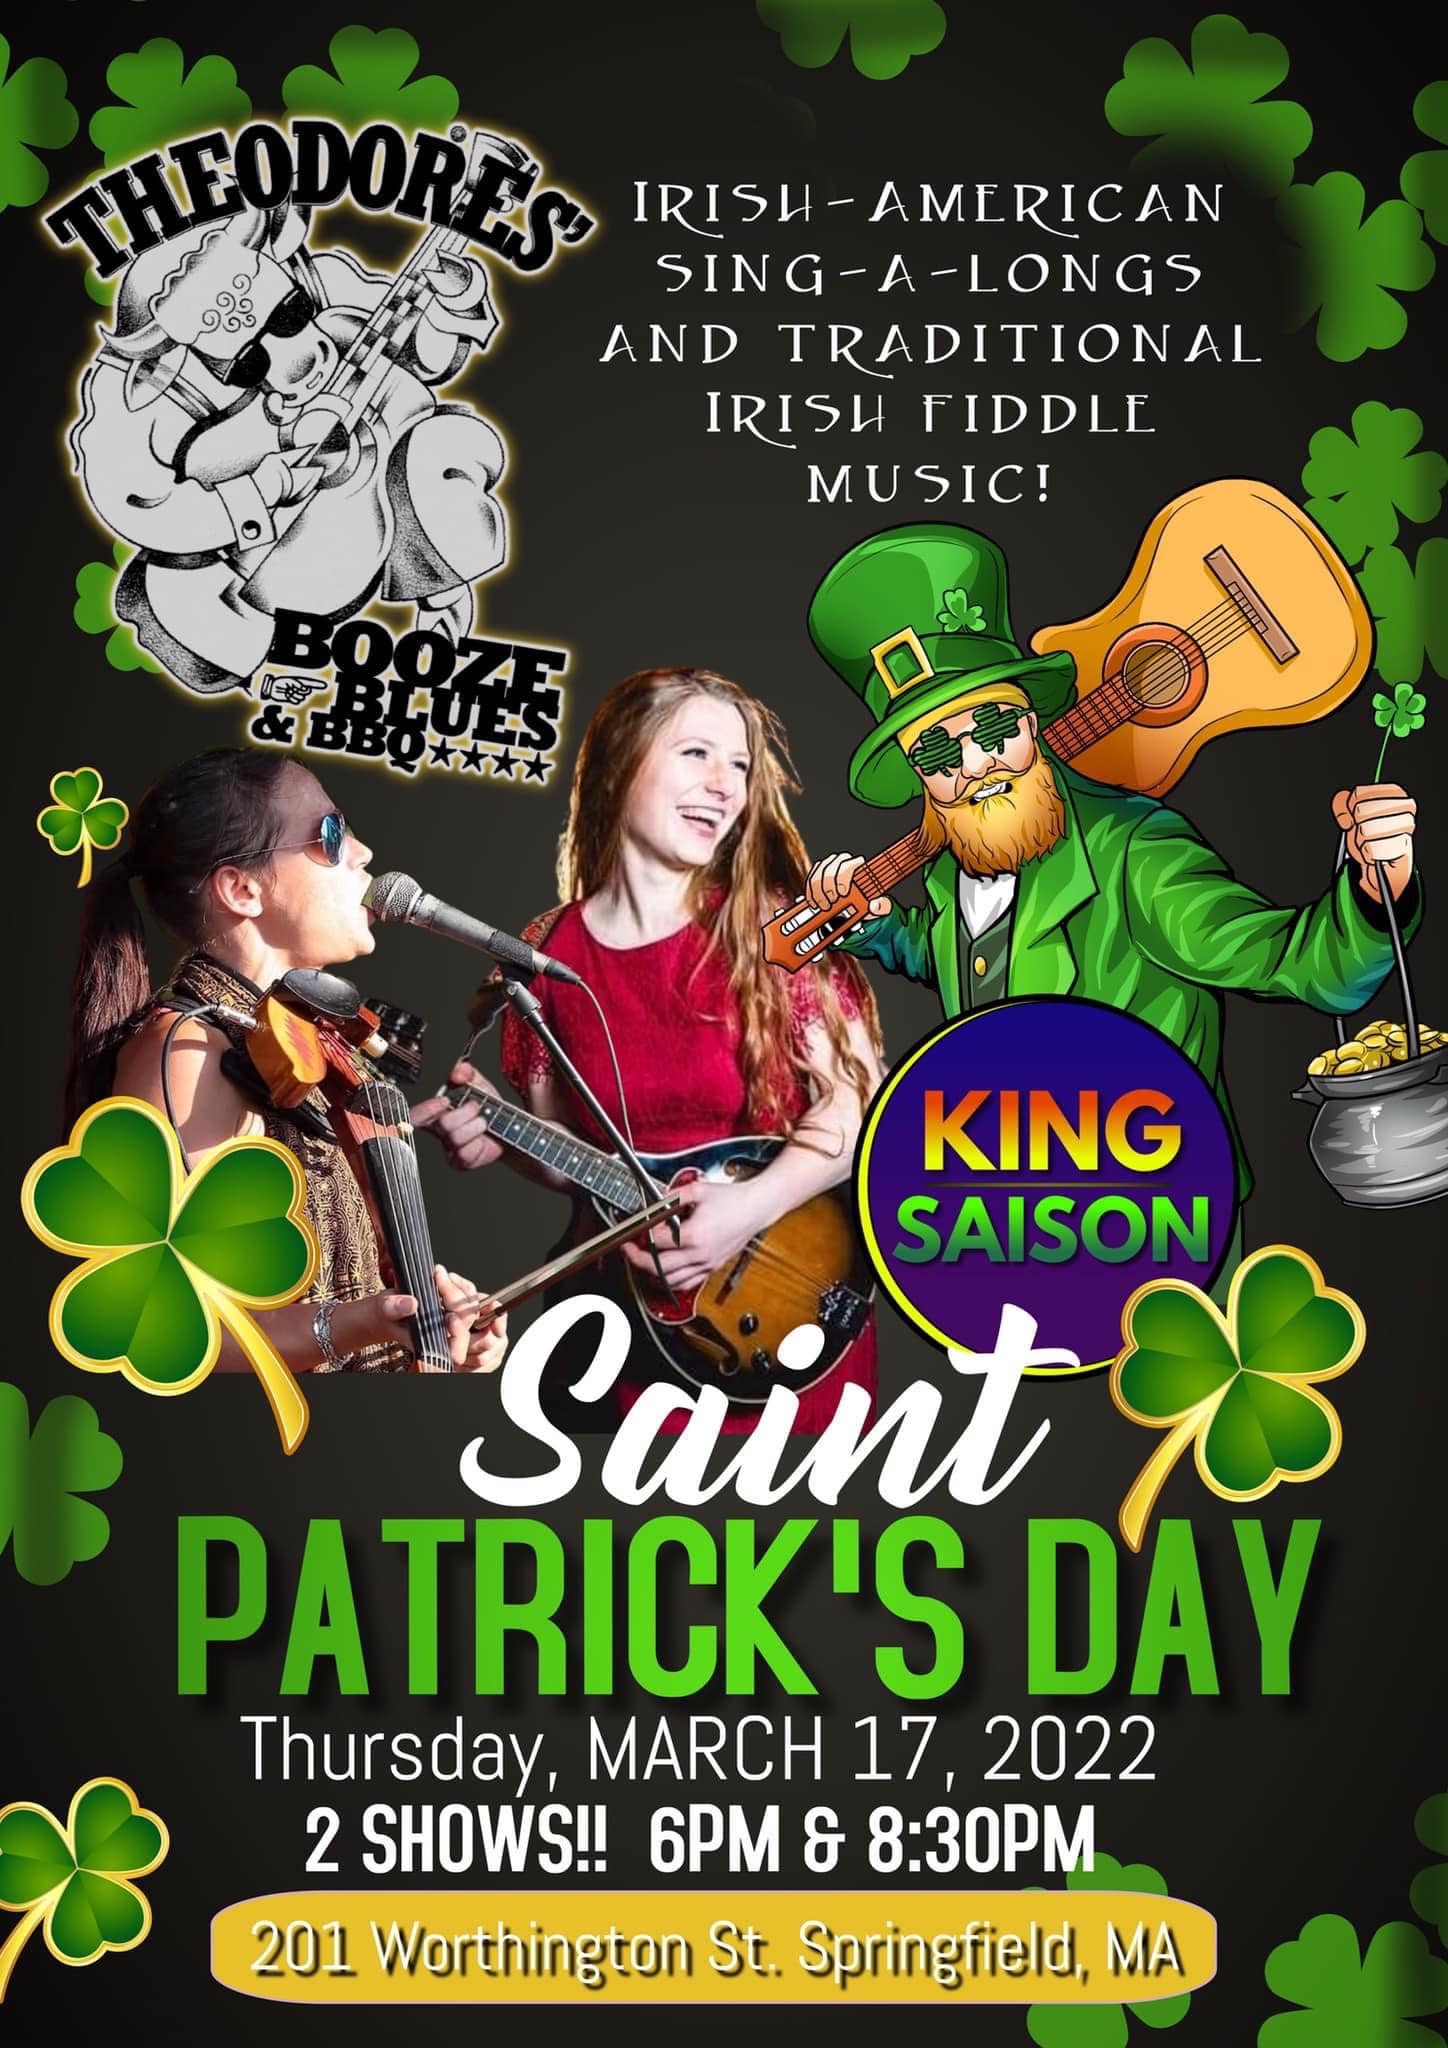 St. Patrick's Day March 17th